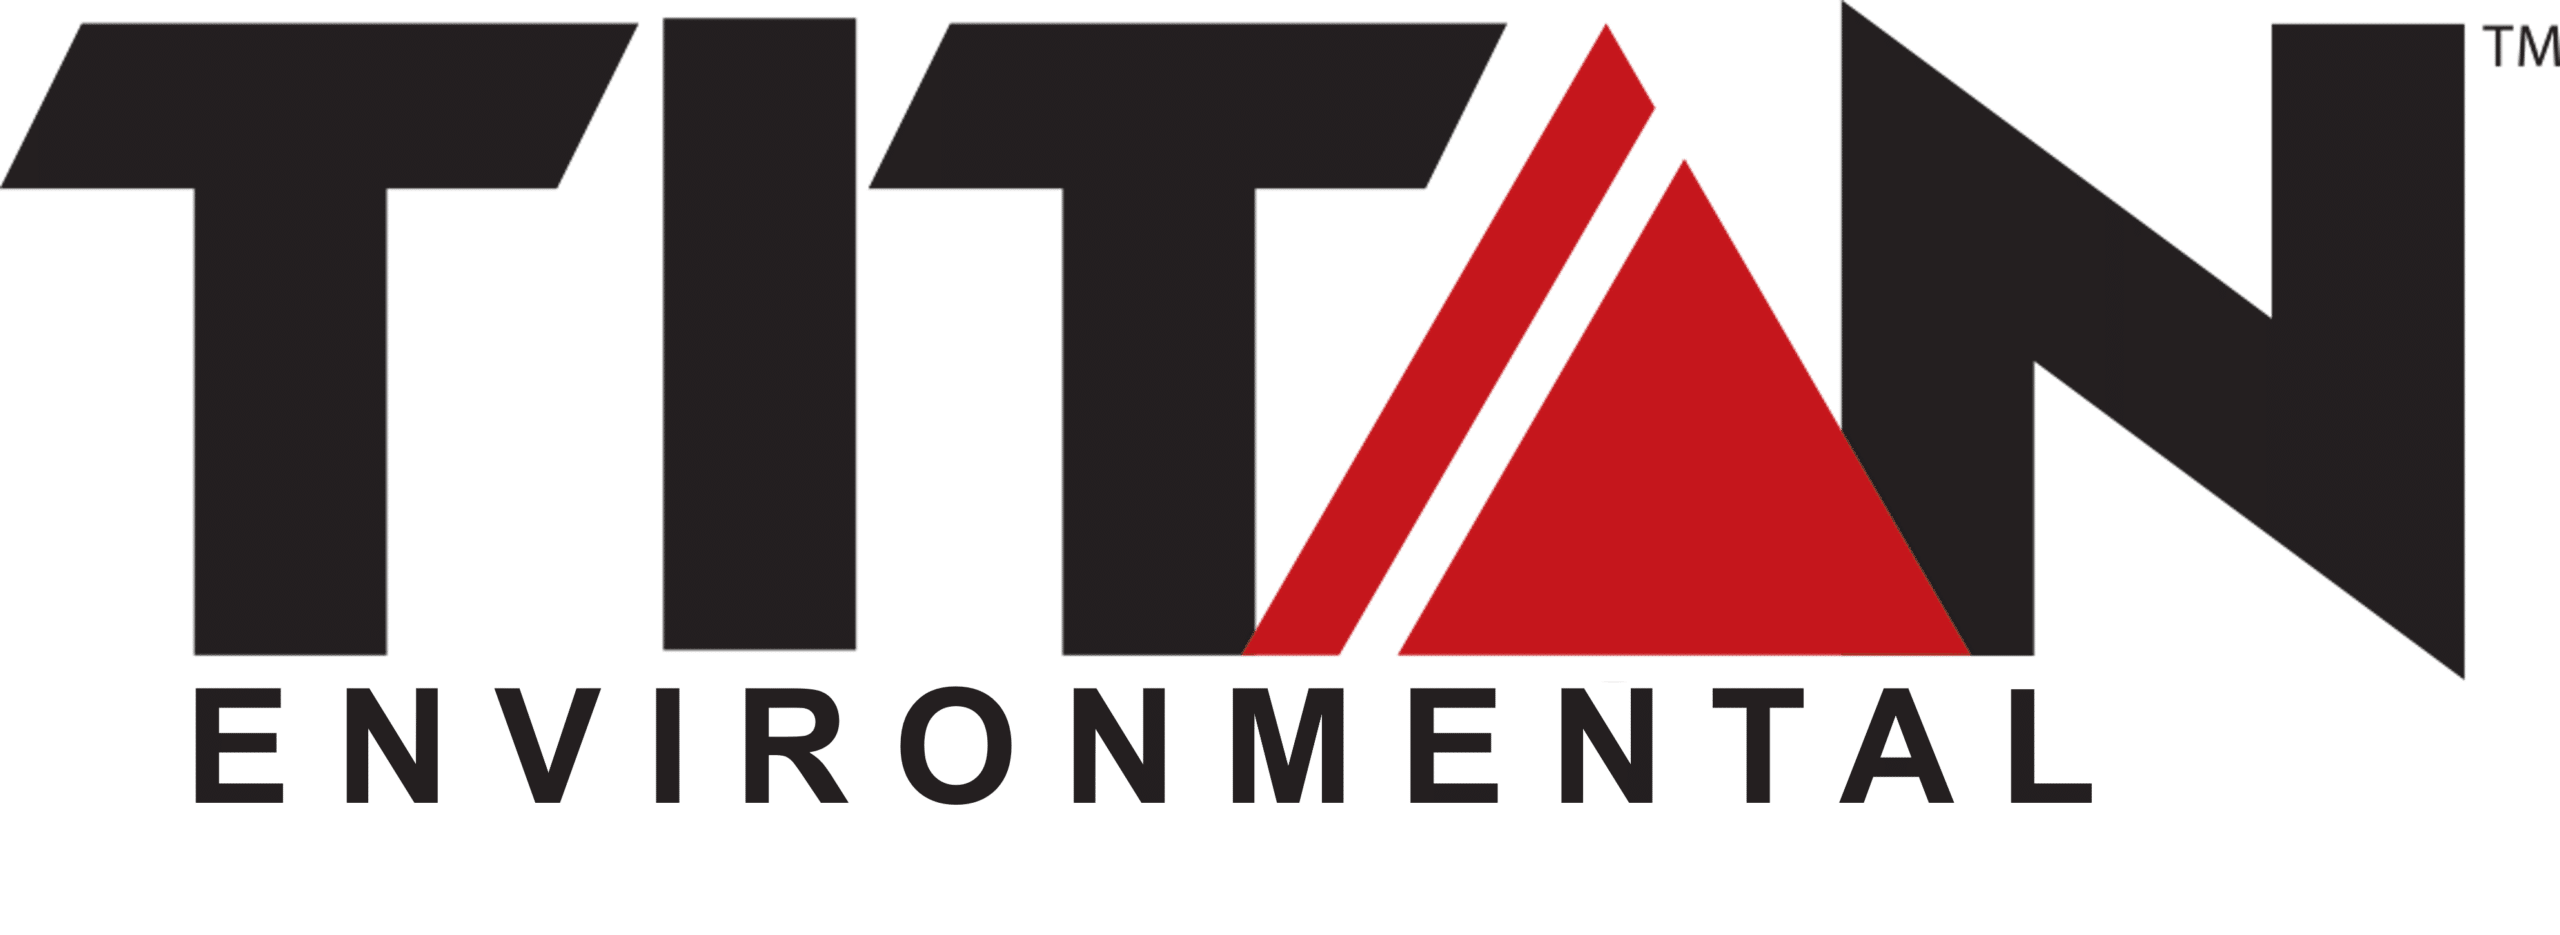 Titan Environmental Logo with black lettering and red triangle.